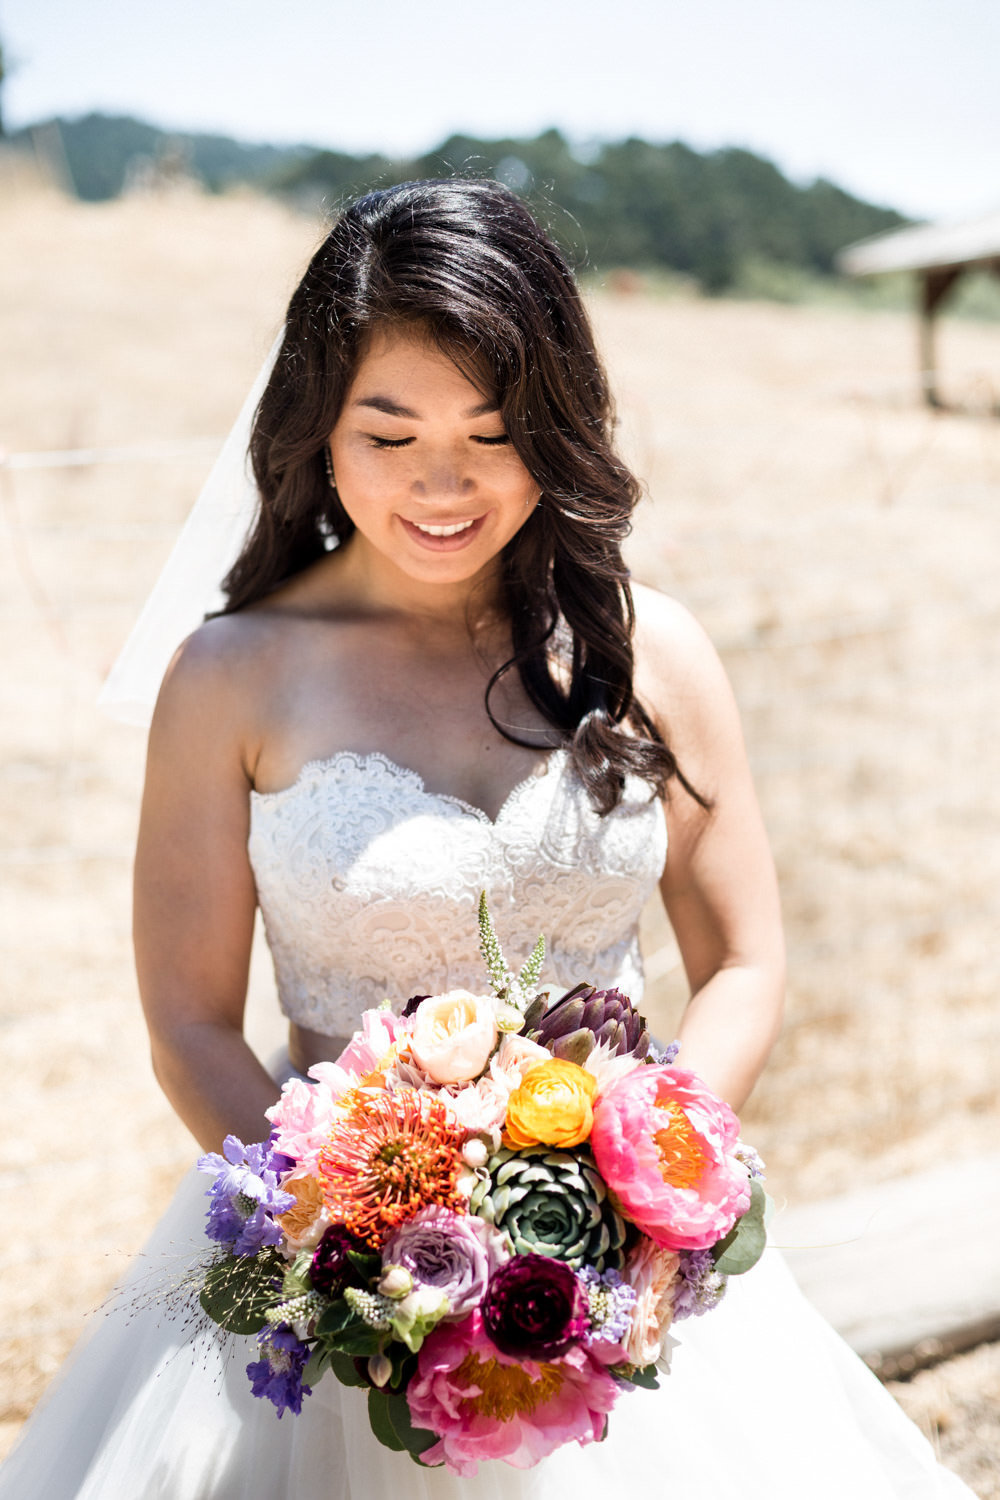 Bridal Portrait at Pie Ranch in Pescadero California by Danielle Motif Photography